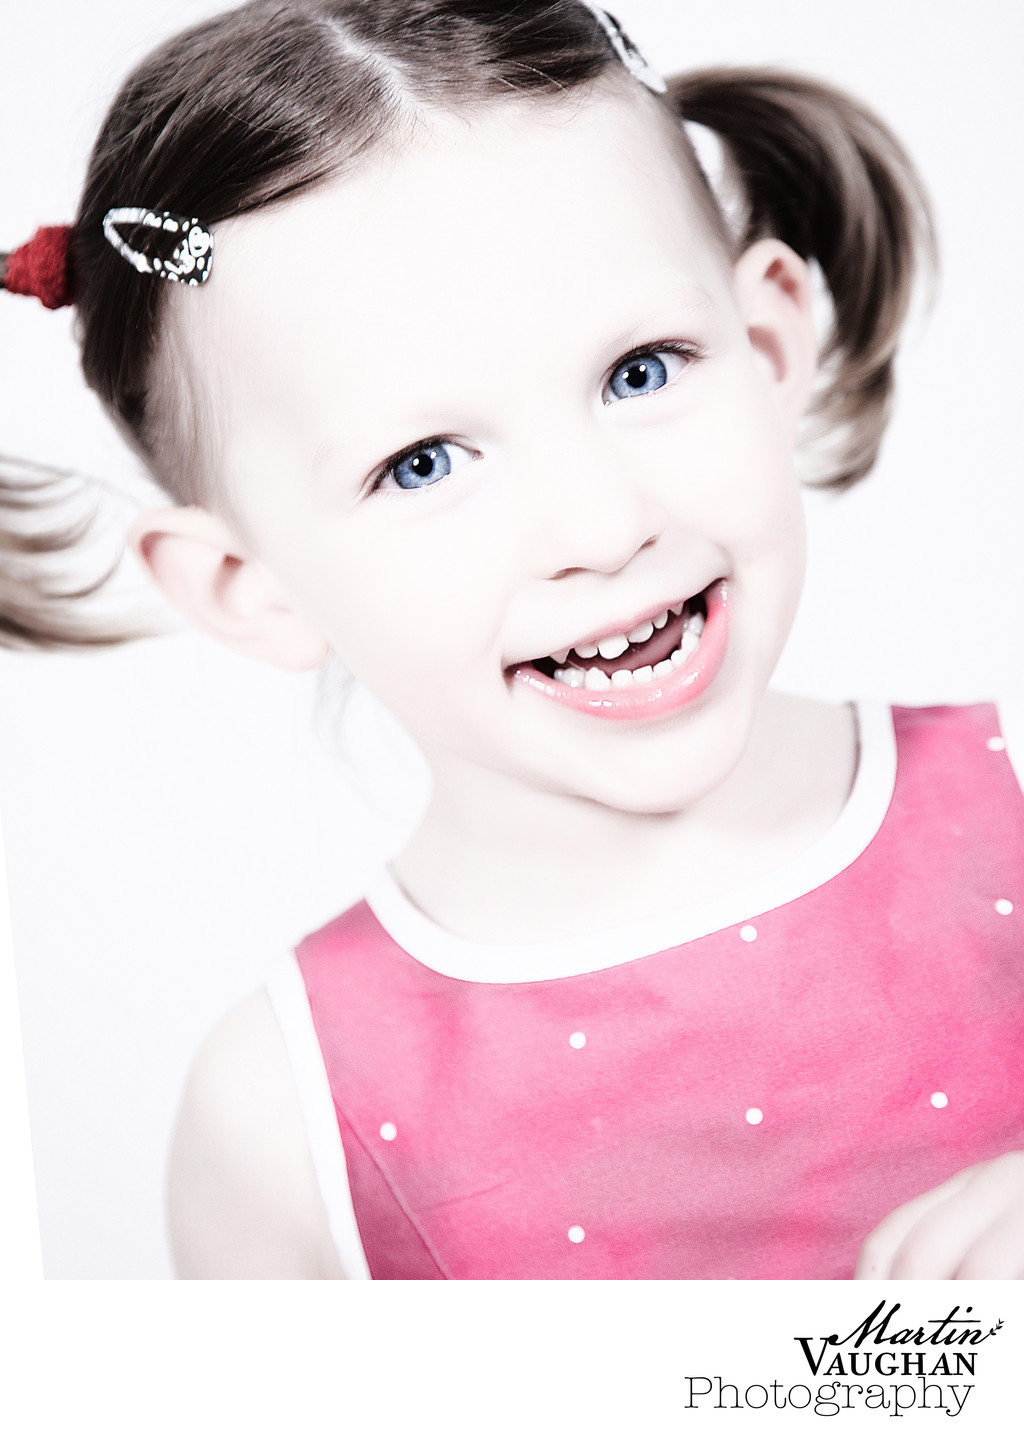 Childrens portrait photographer in North Wales